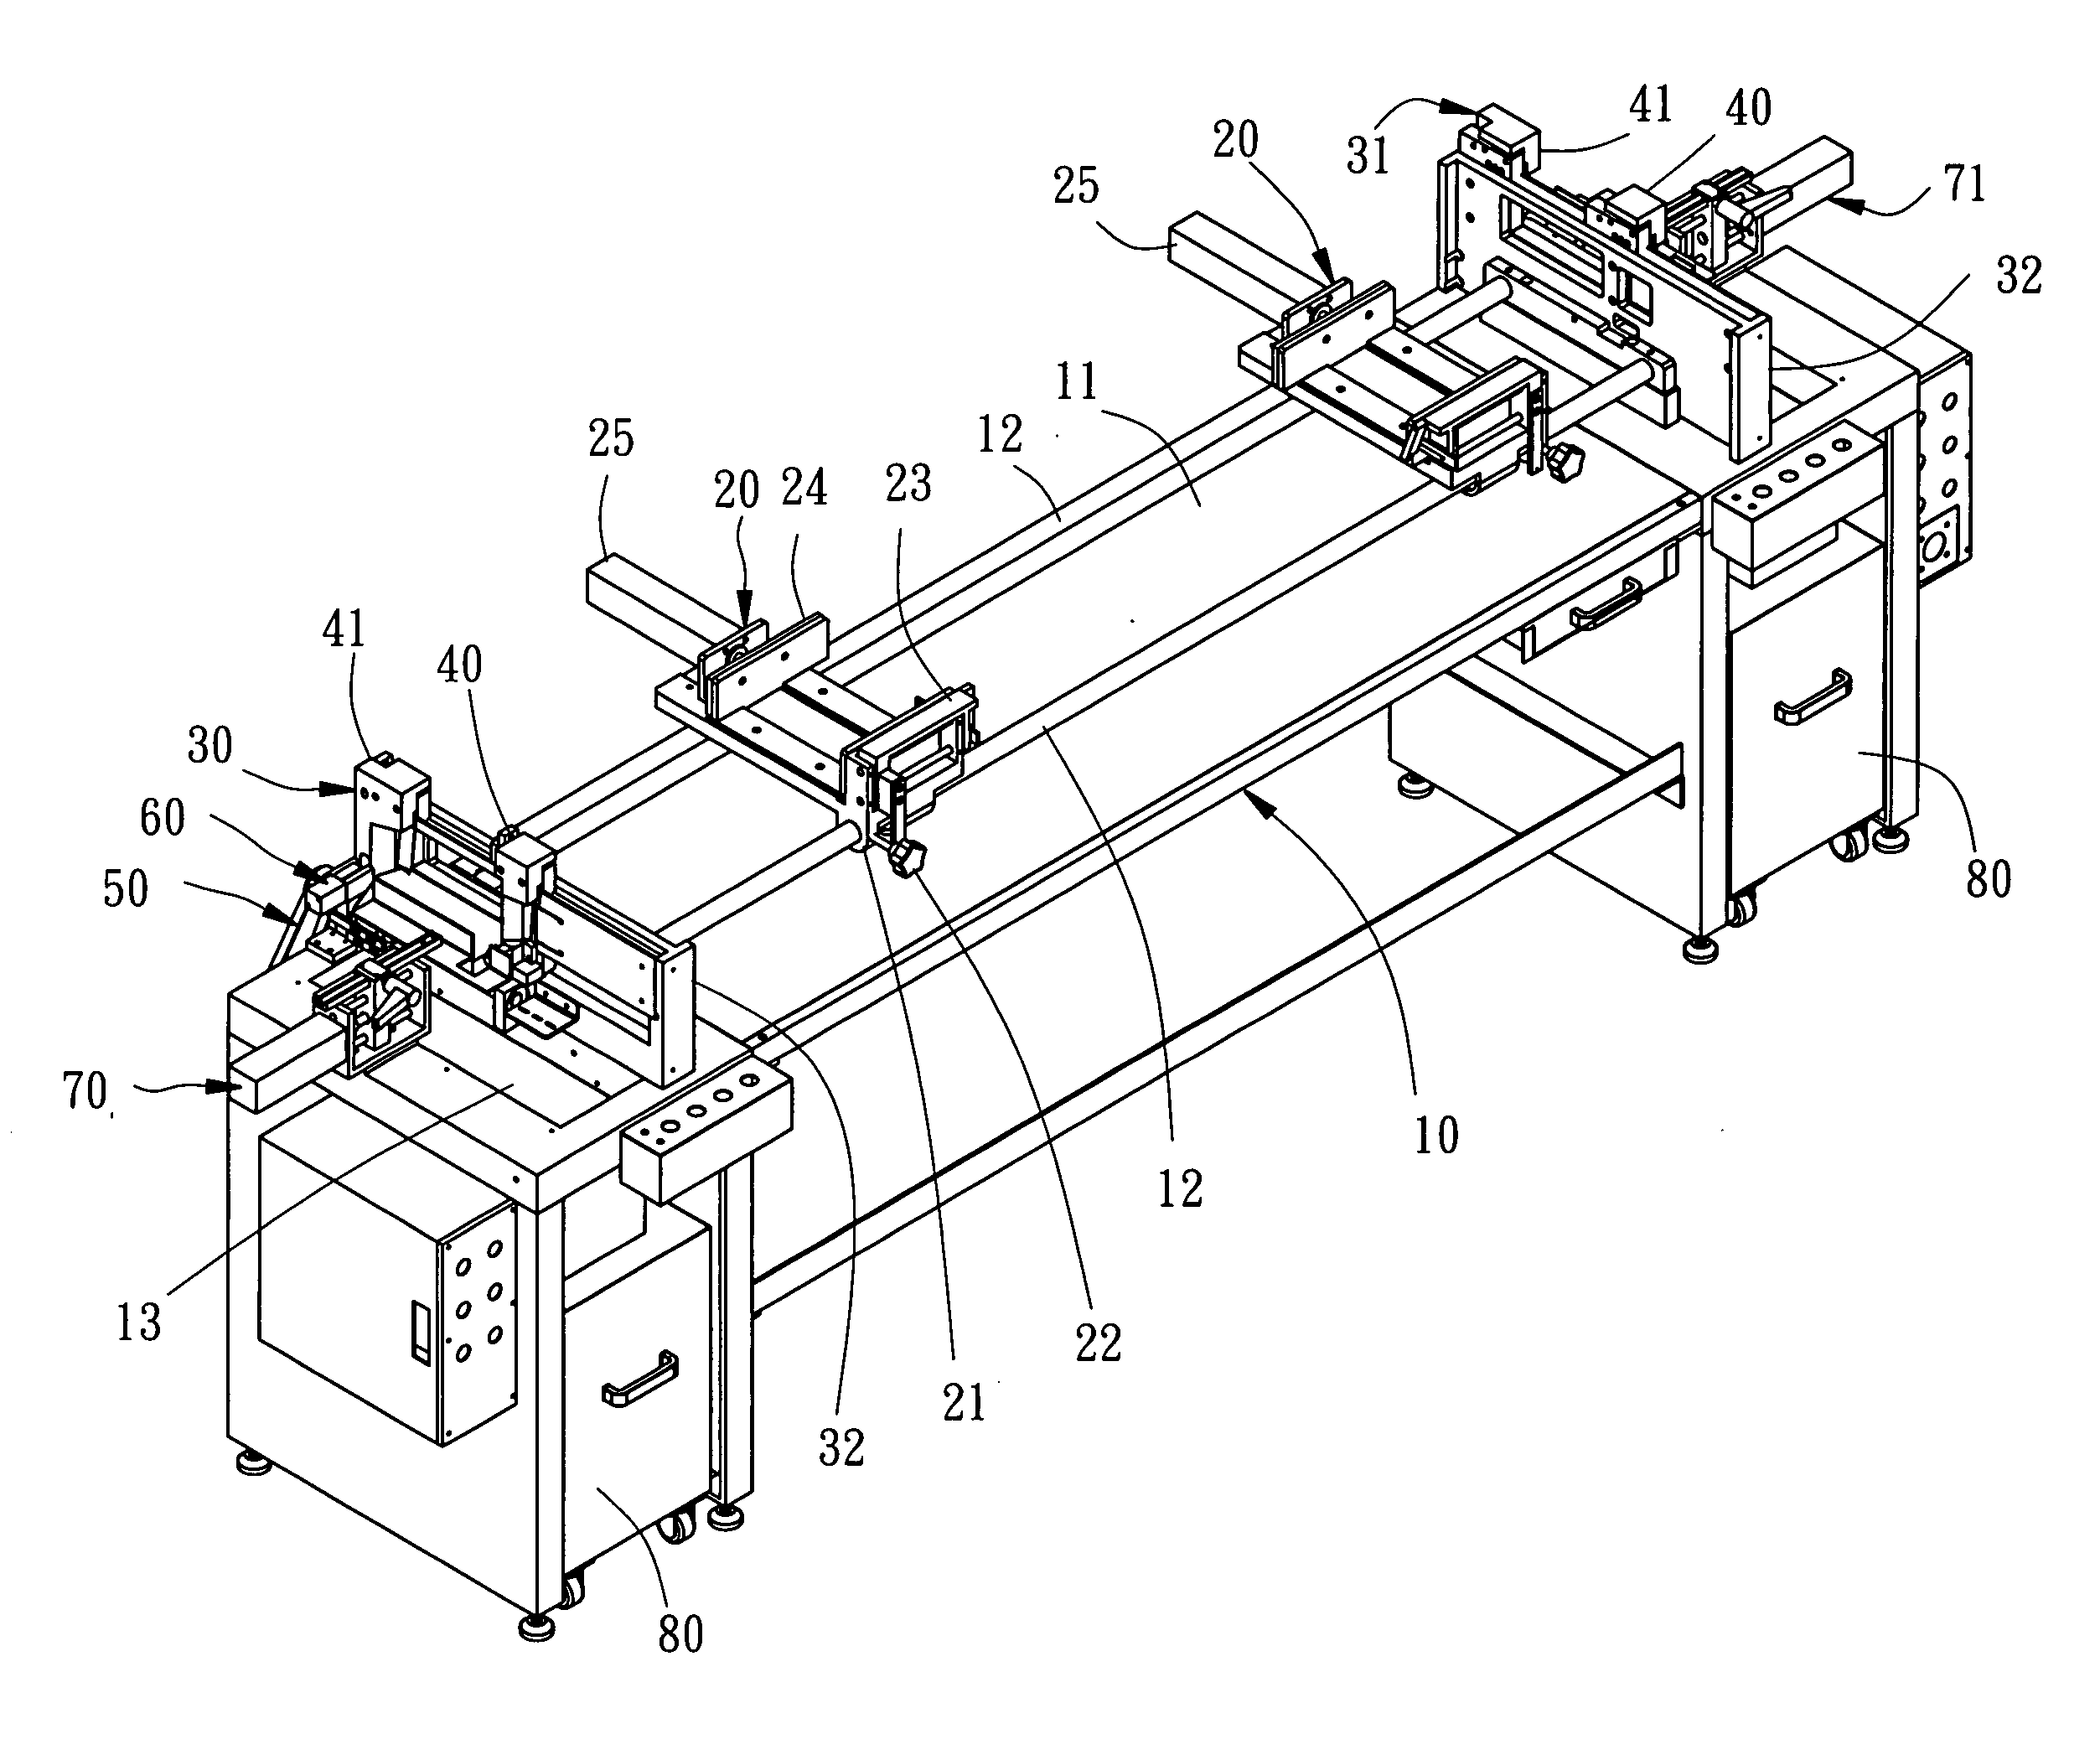 Machine for cutting parts of a window blind